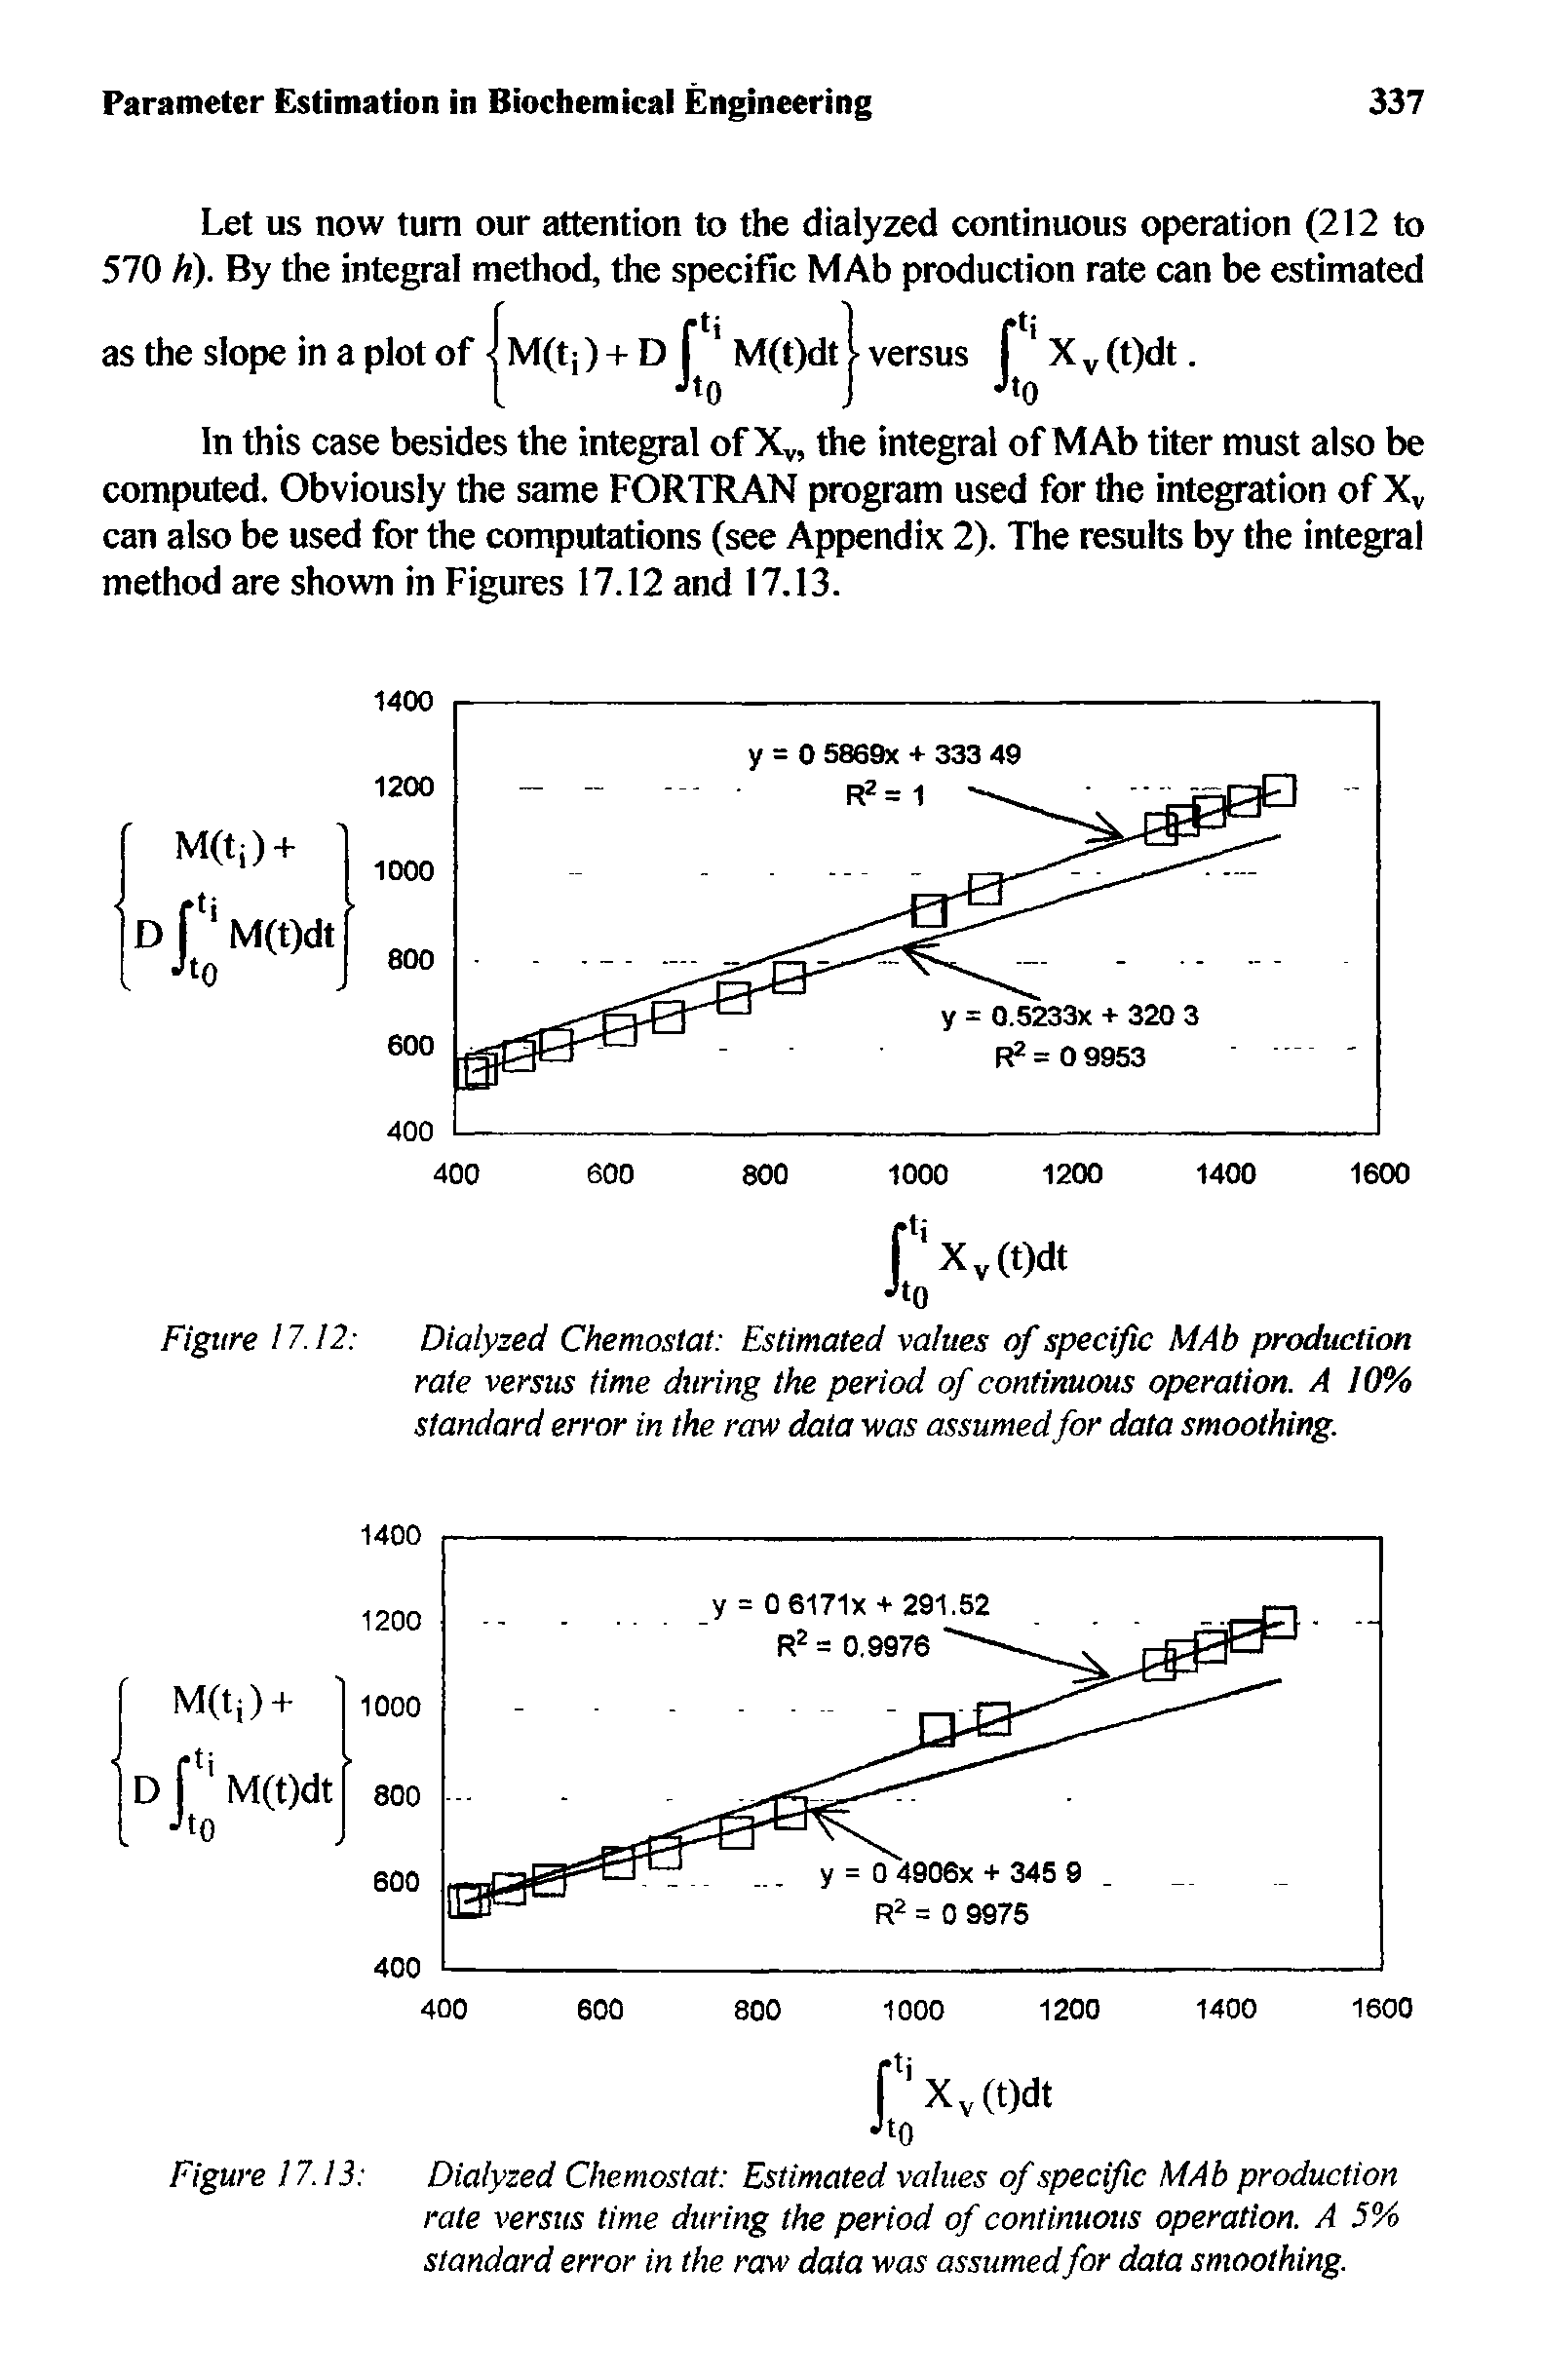 Figure 17.13 Dialyzed Chemostat Estimated values of specific MAb production rate versus time during the period of continuous operation. A 5% standard error in the raw data was assumed for data smoothing.